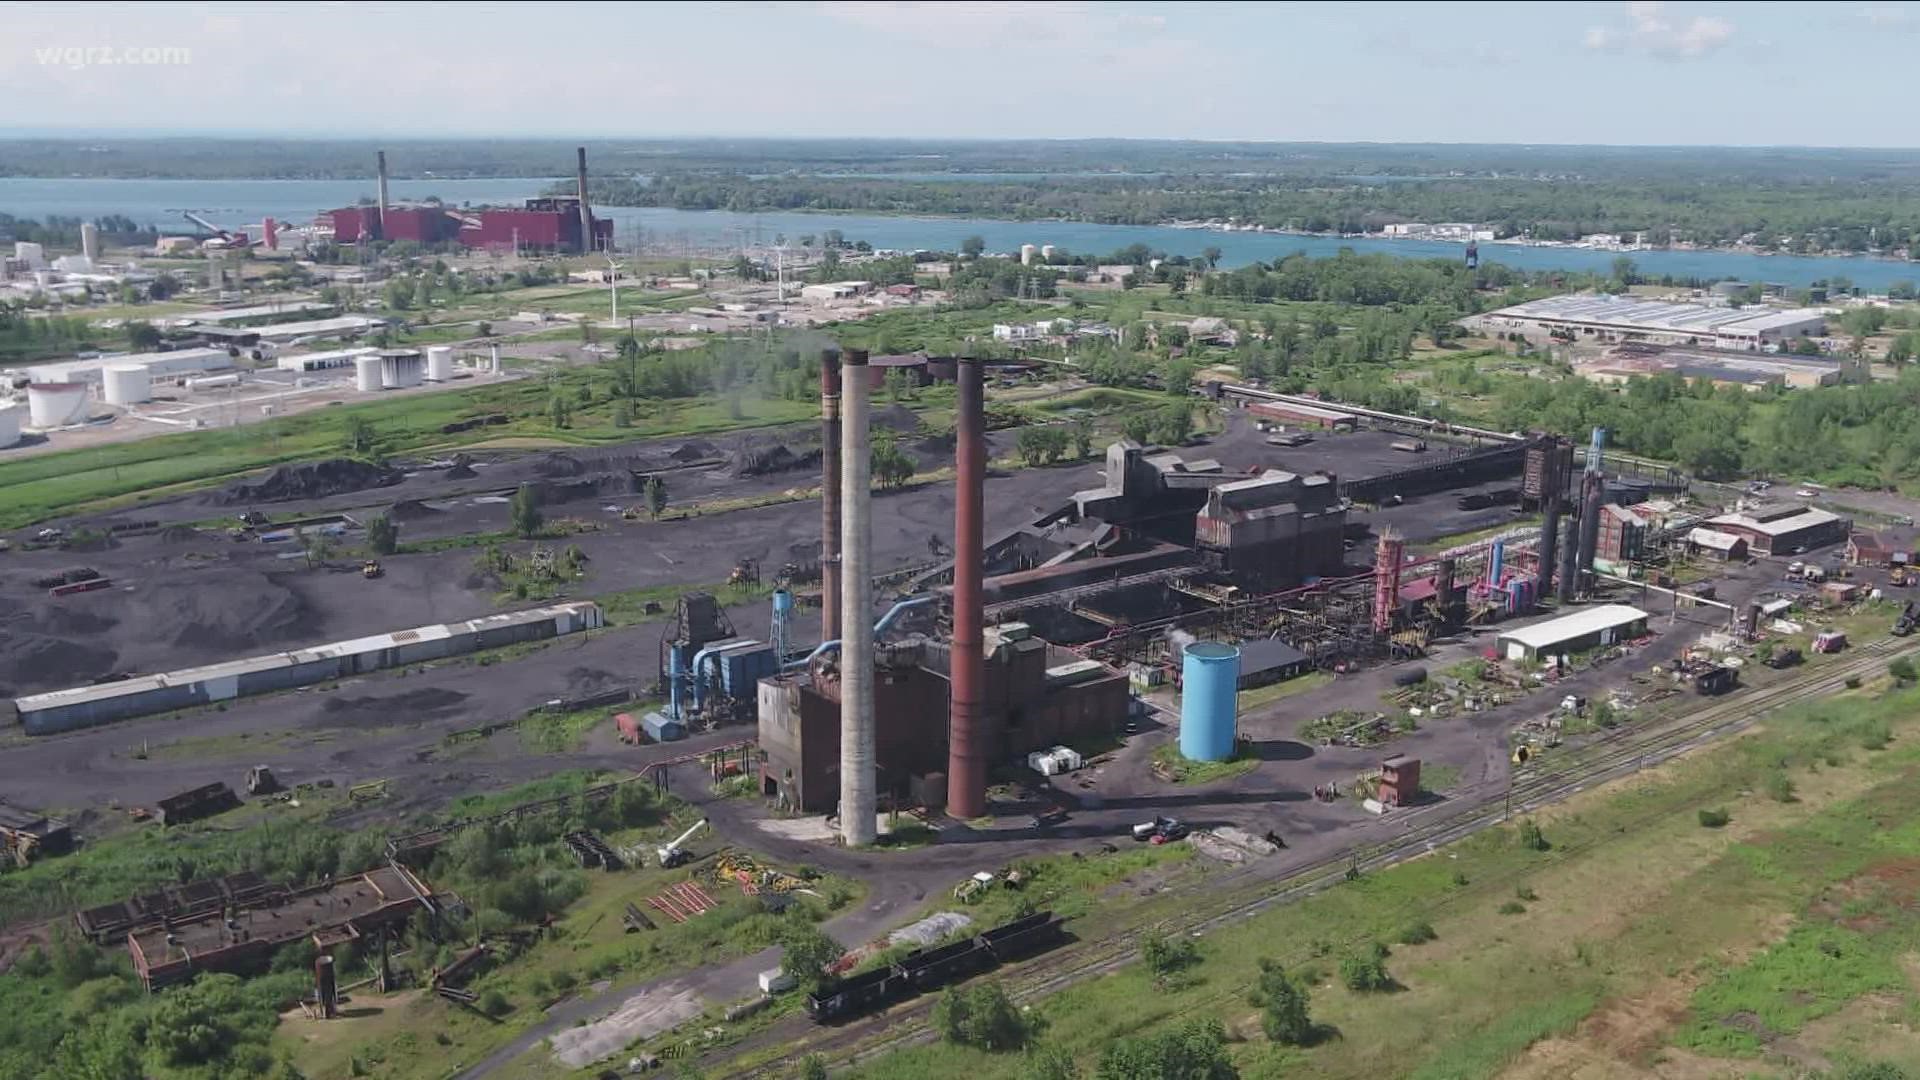 Researchers at UB and Fredonia say they found soil contamination around the now closed Coke plant in Tonawanda.